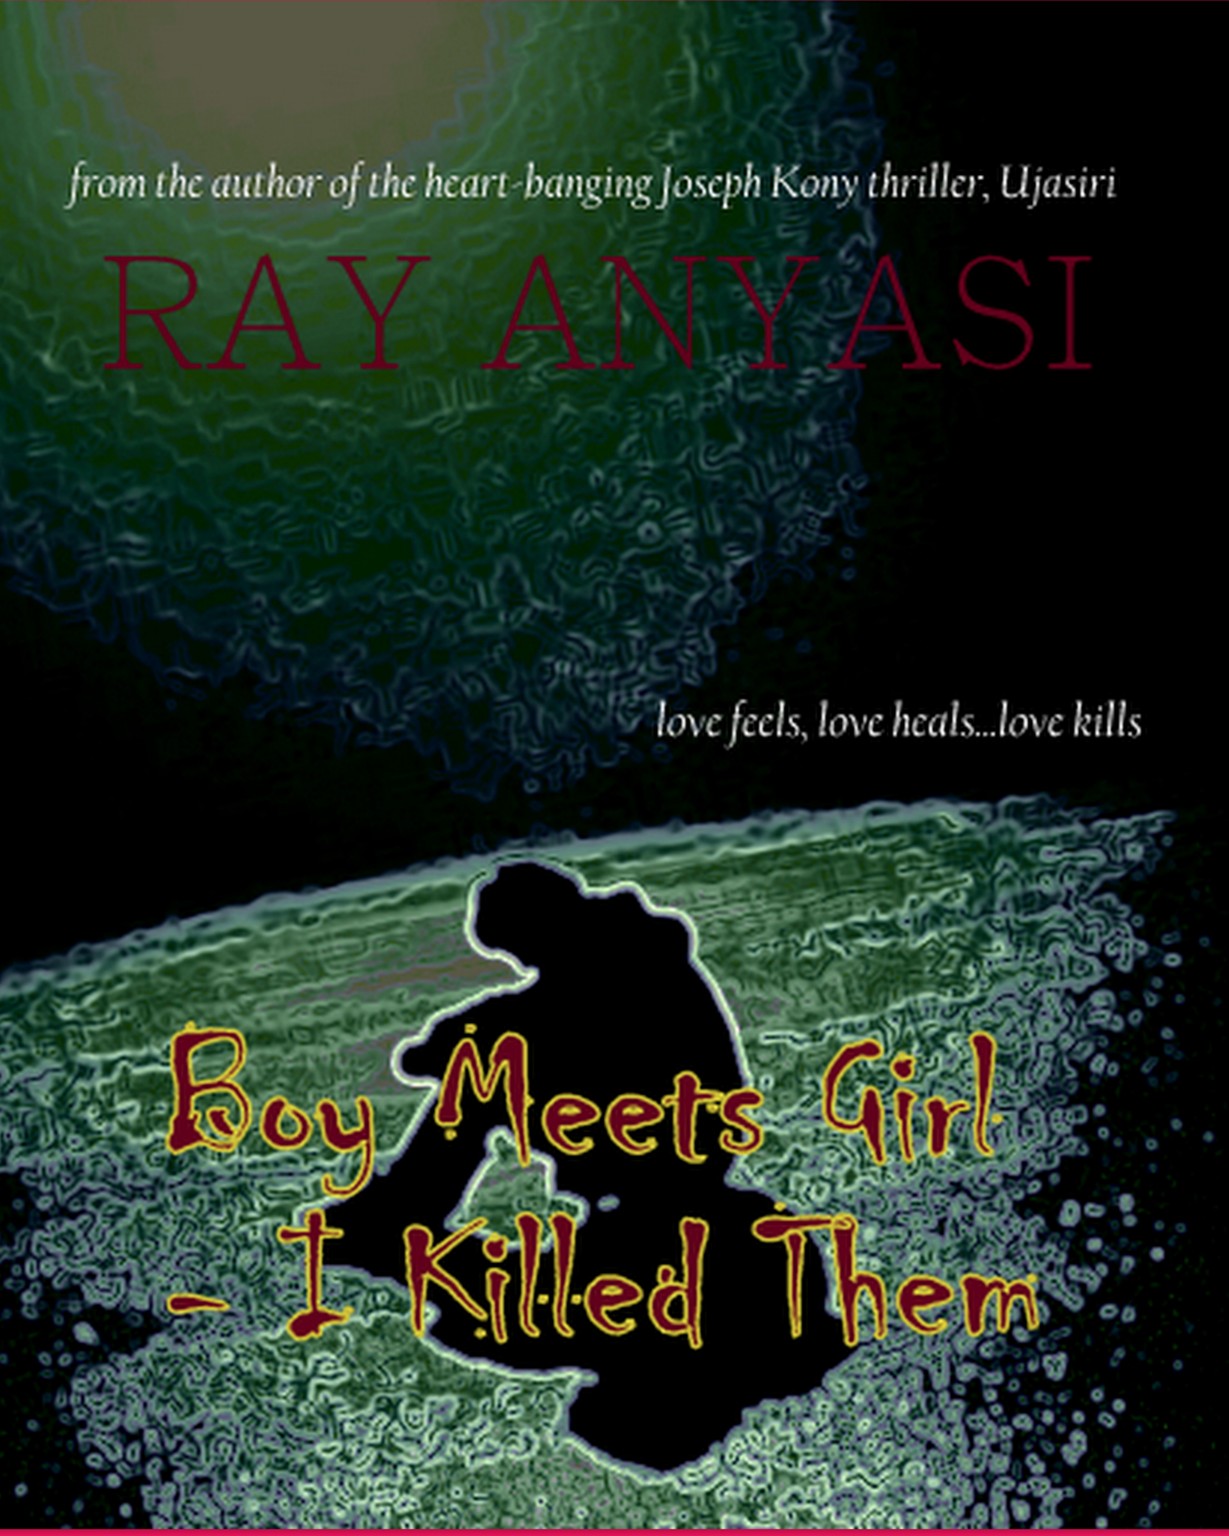 Boy-meets-Girl-and-I-killed-them